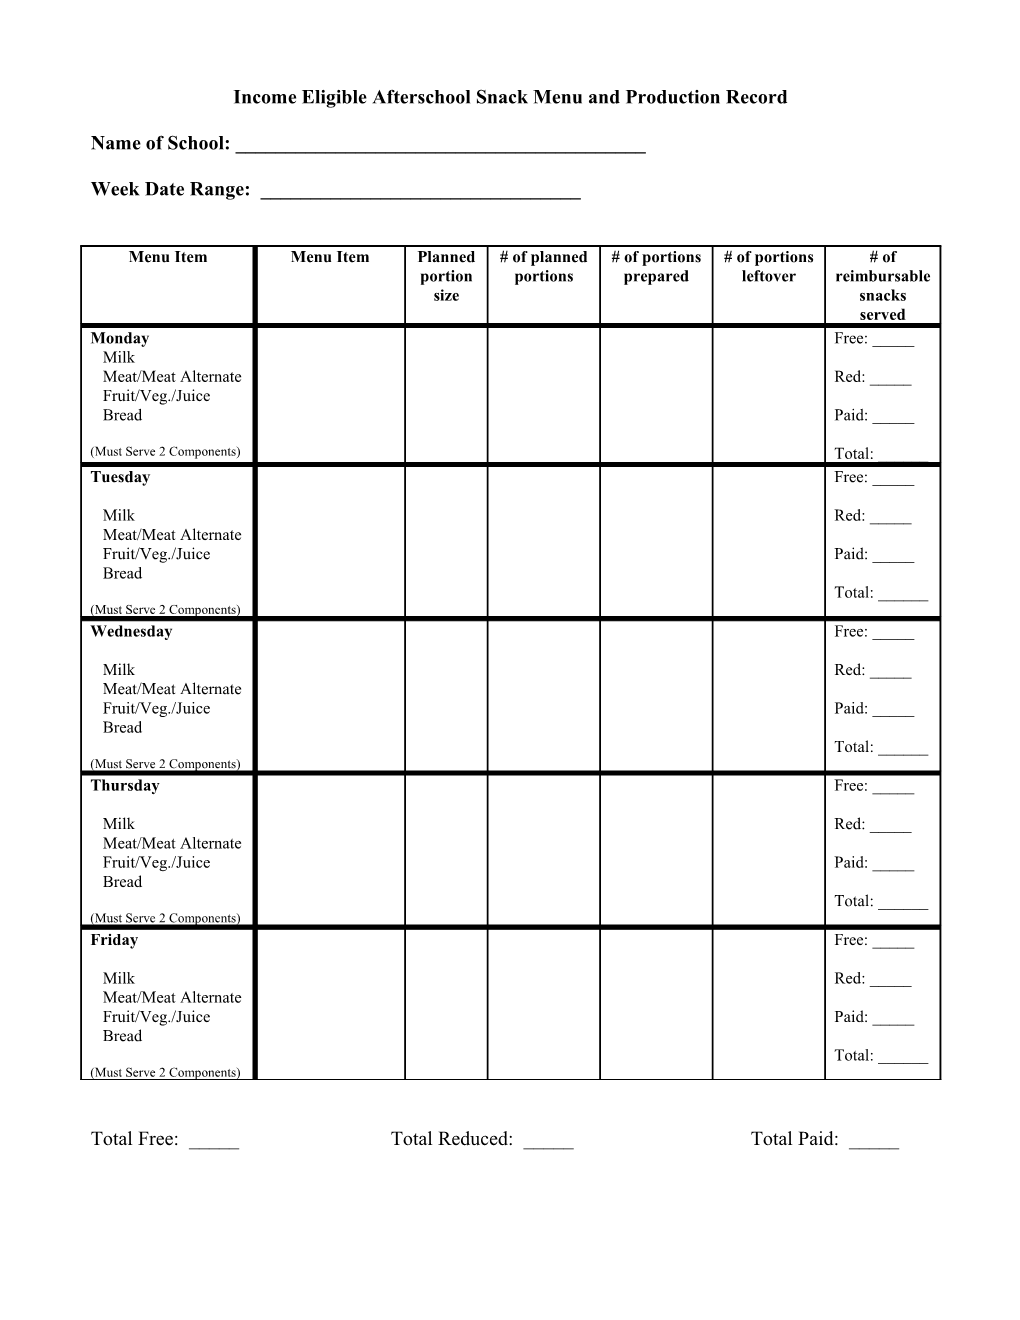 Income Eligible Afterschool Snack Menu and Production Record